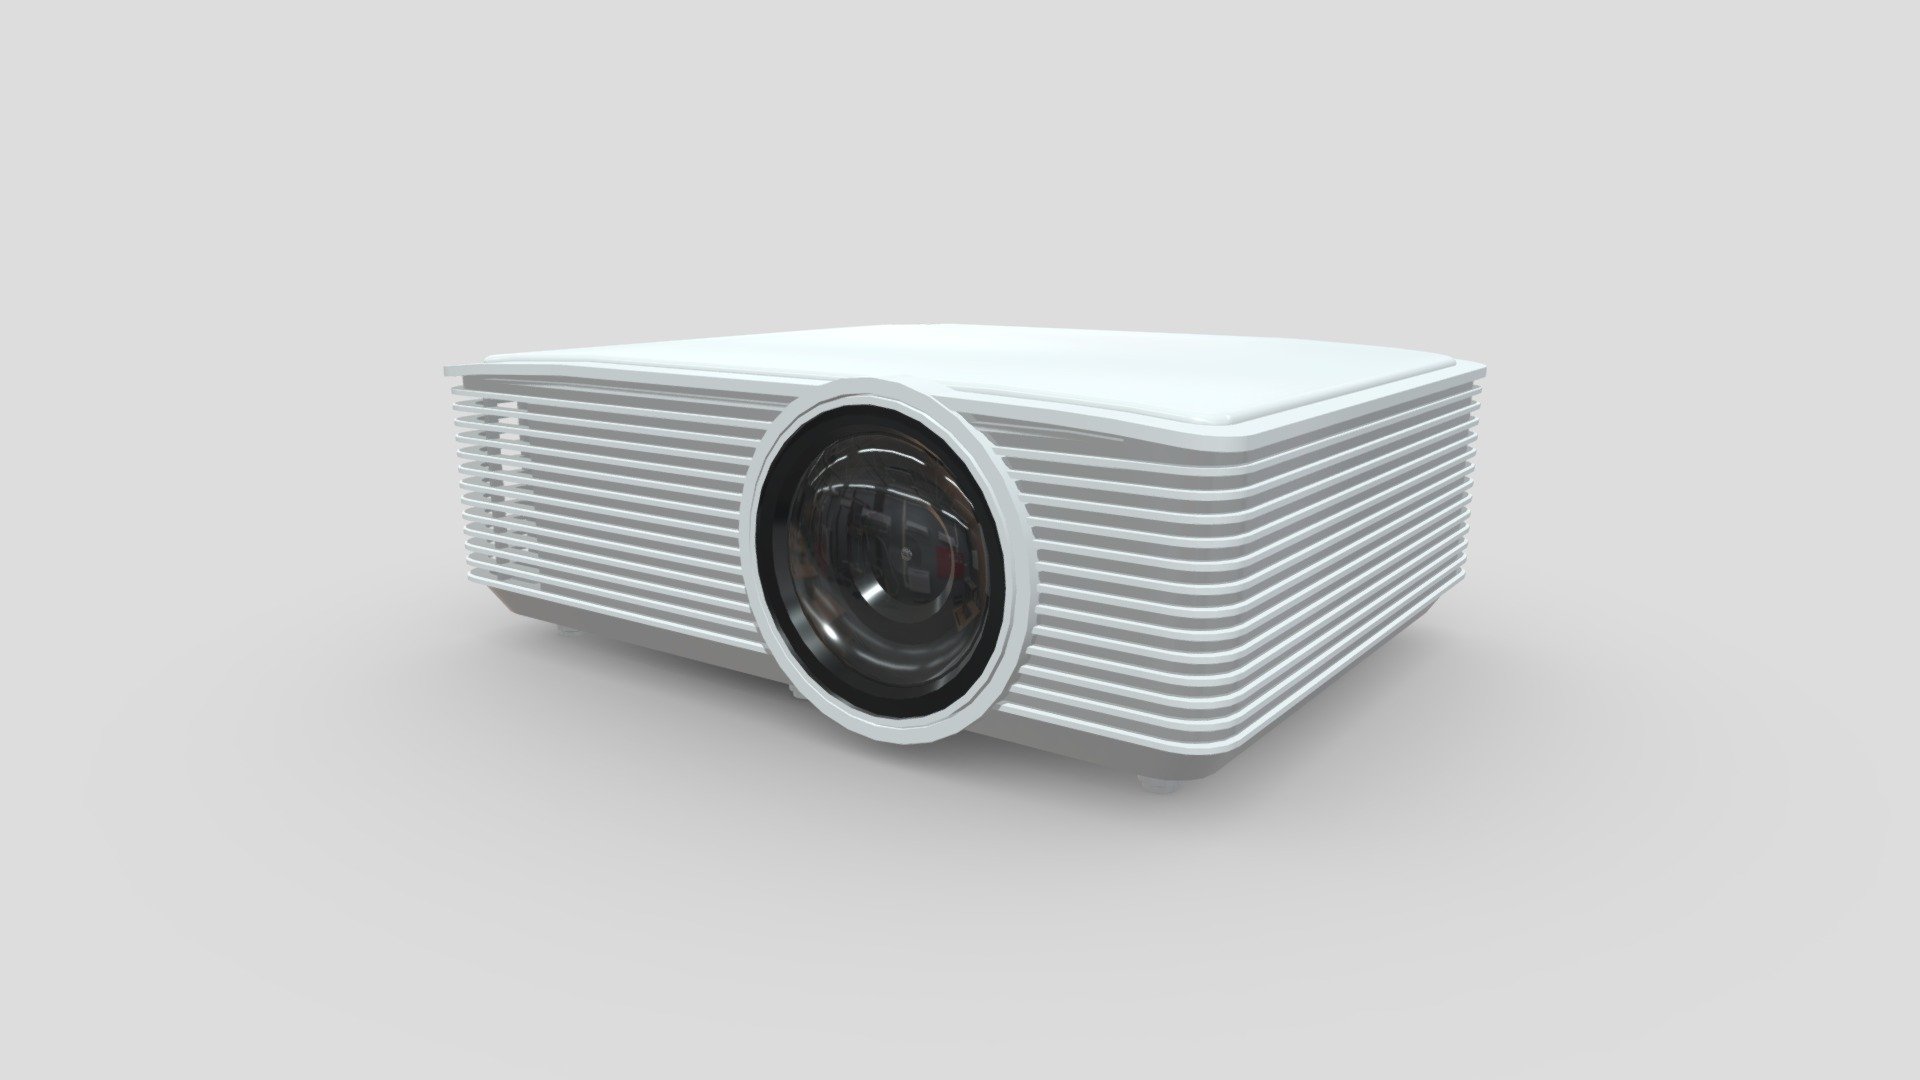 This is a low poly 3d model of genertic and unbranded white projector for presentations and video showcase - Generic white digital Projector - Buy Royalty Free 3D model by assetfactory 3d model